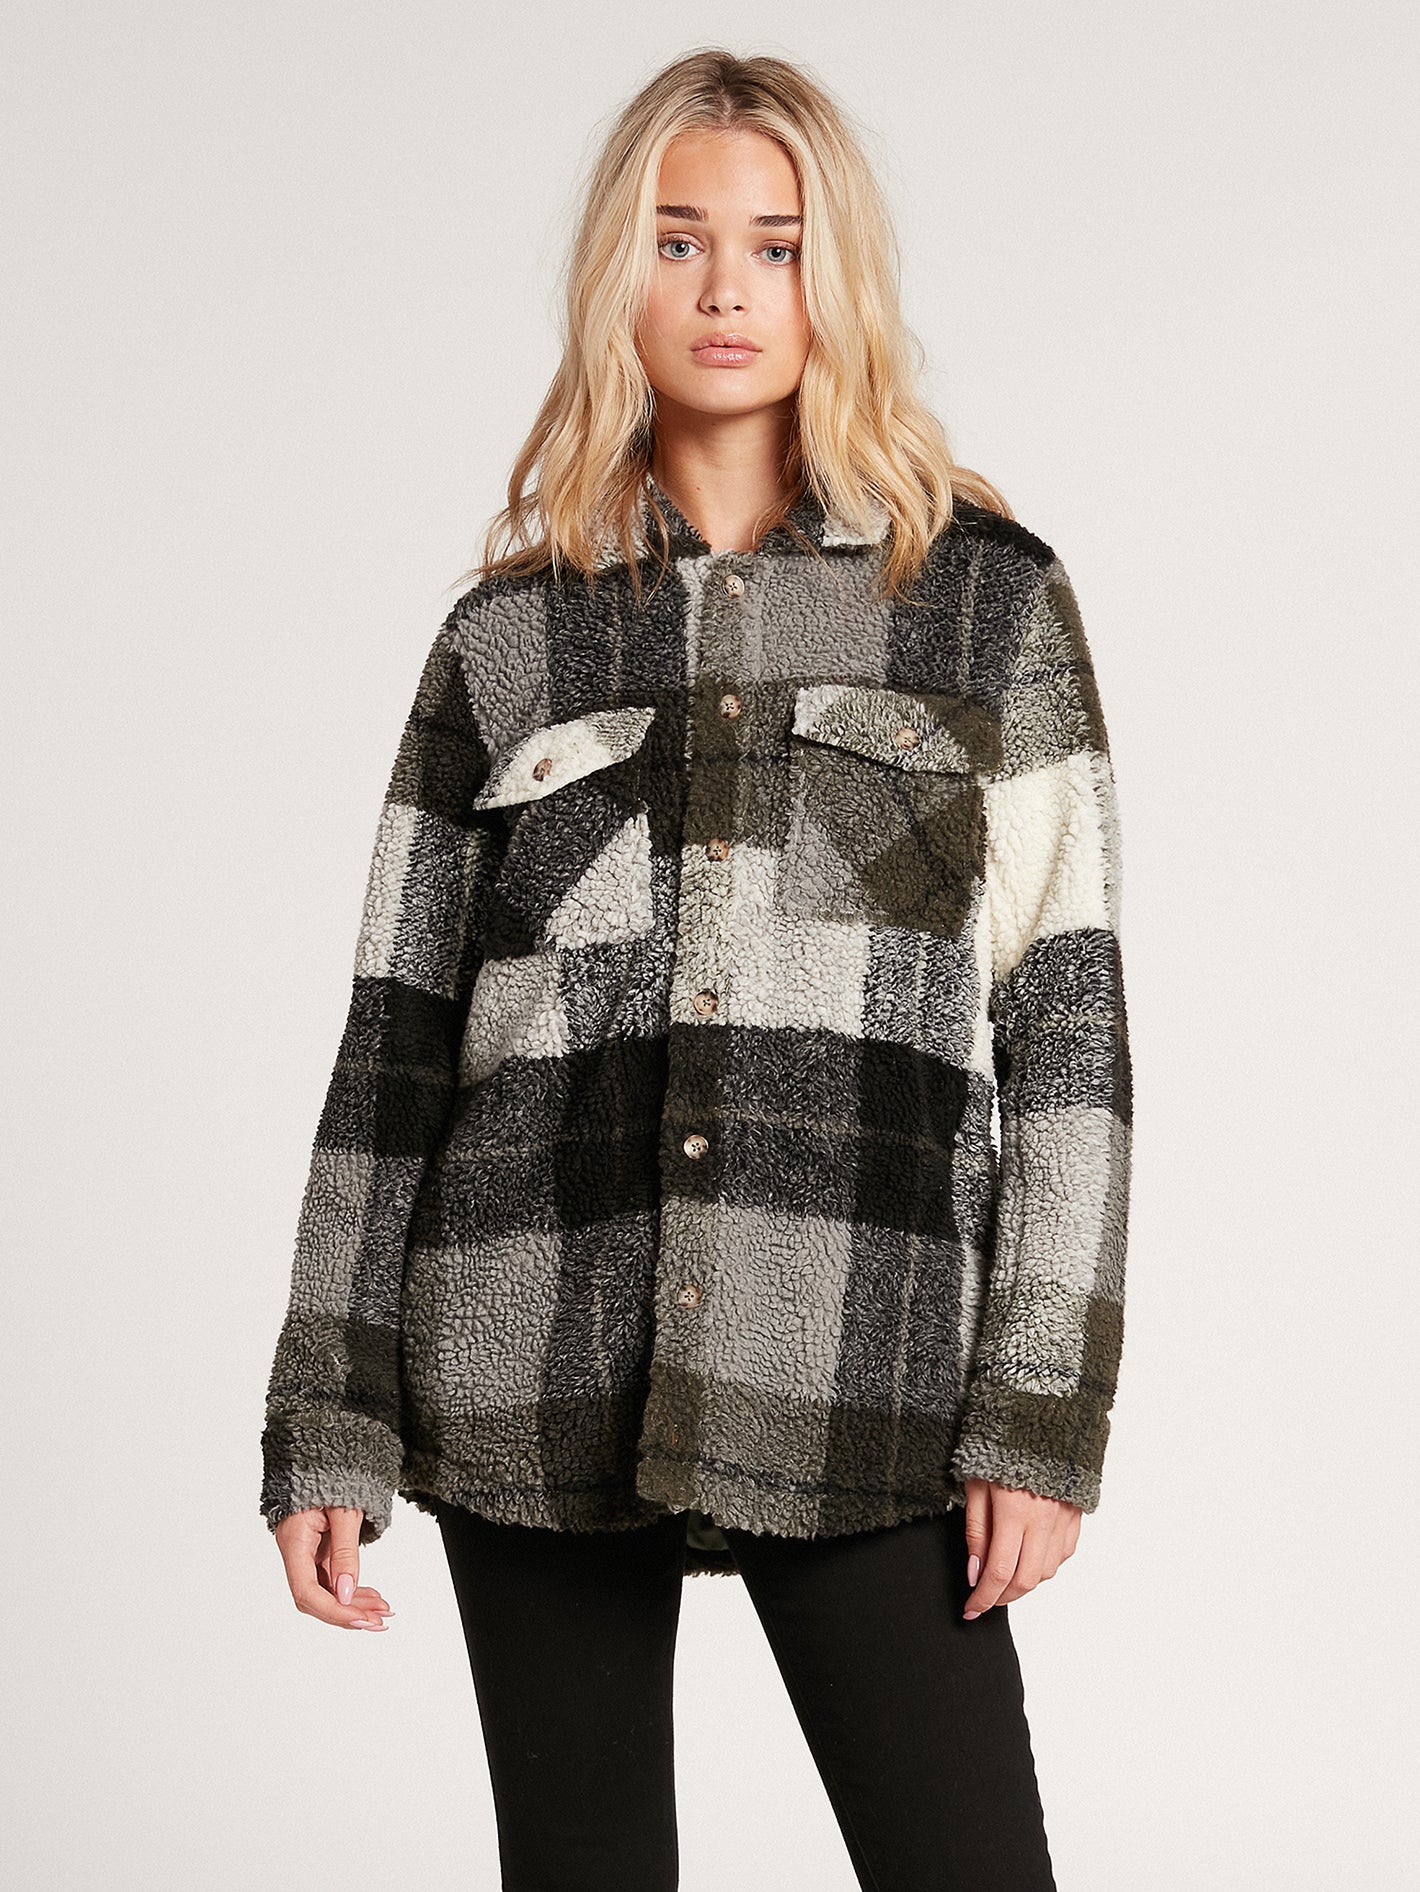 Silent Sherpa Plaid Jacket - Army Green Combo – Volcom US